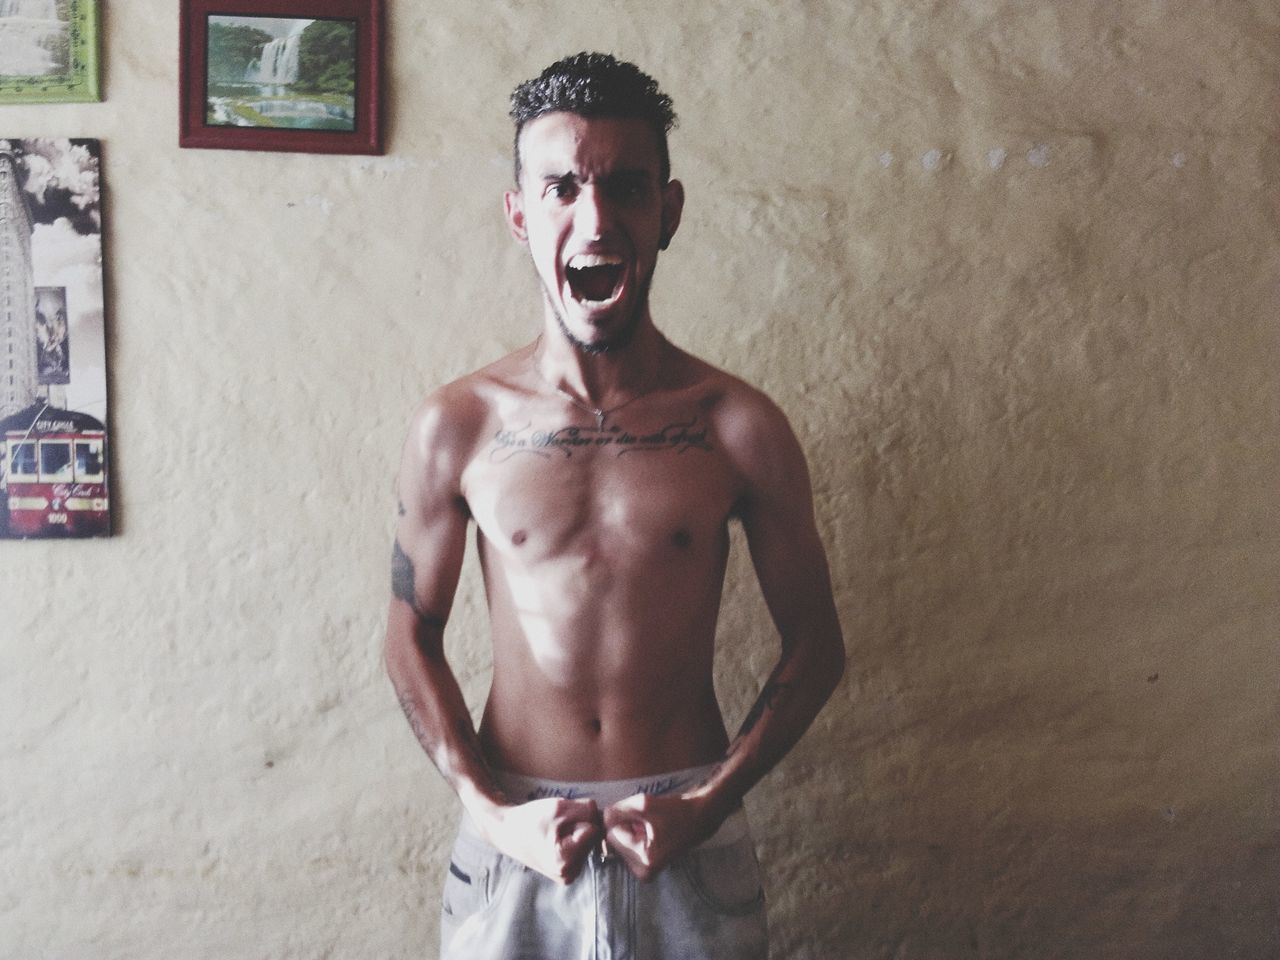 shirtless, one person, standing, young adult, young men, lifestyles, real people, indoors, wall - building feature, three quarter length, front view, leisure activity, portrait, emotion, looking at camera, muscular build, men, strength, chest, teenage boys